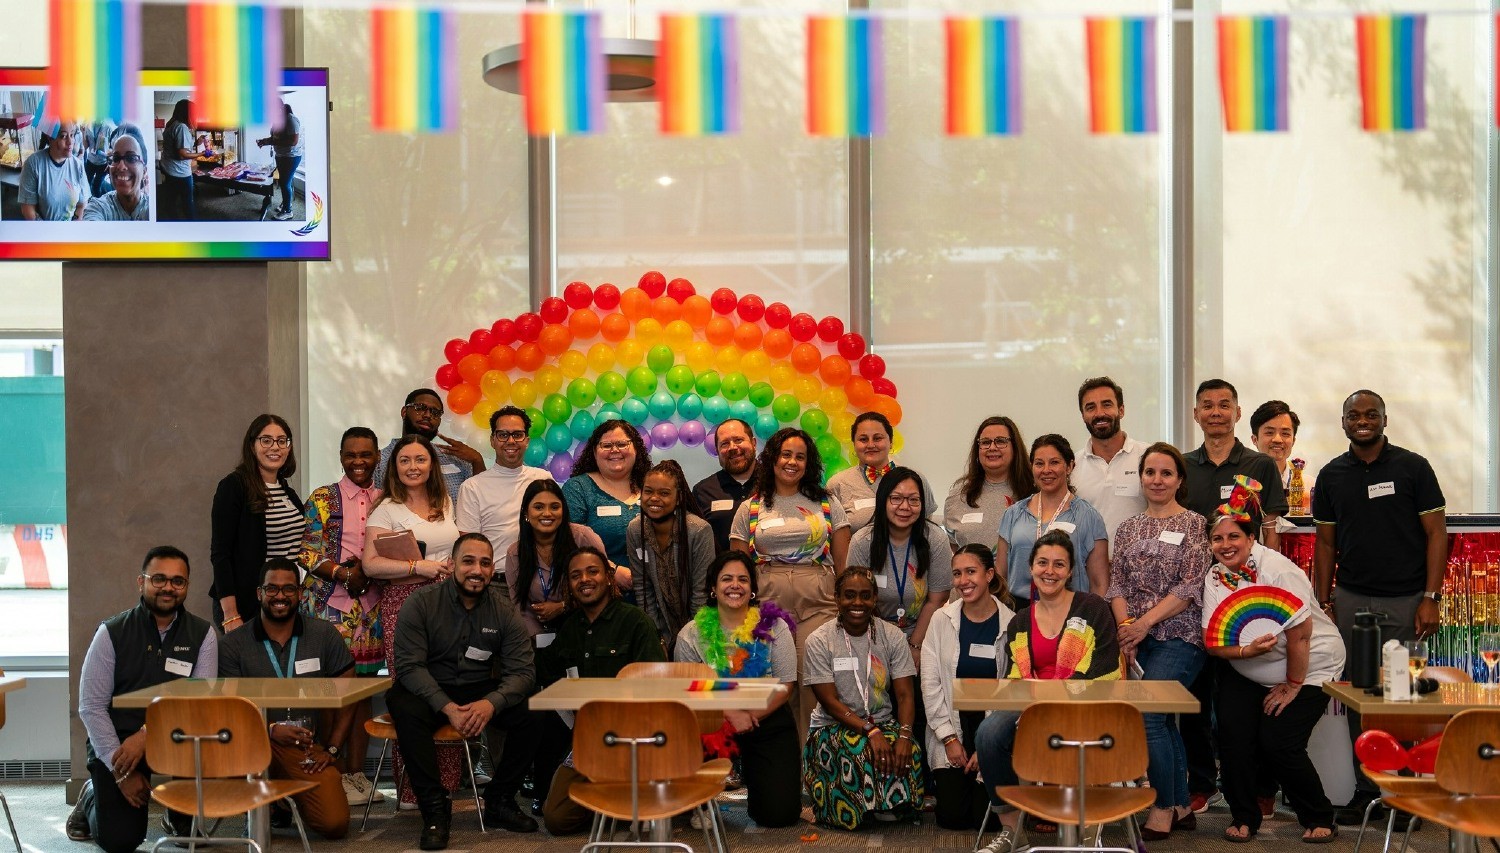 Pride Speed Networking brought together employees to form meaningful connections that transcend professional boundaries.